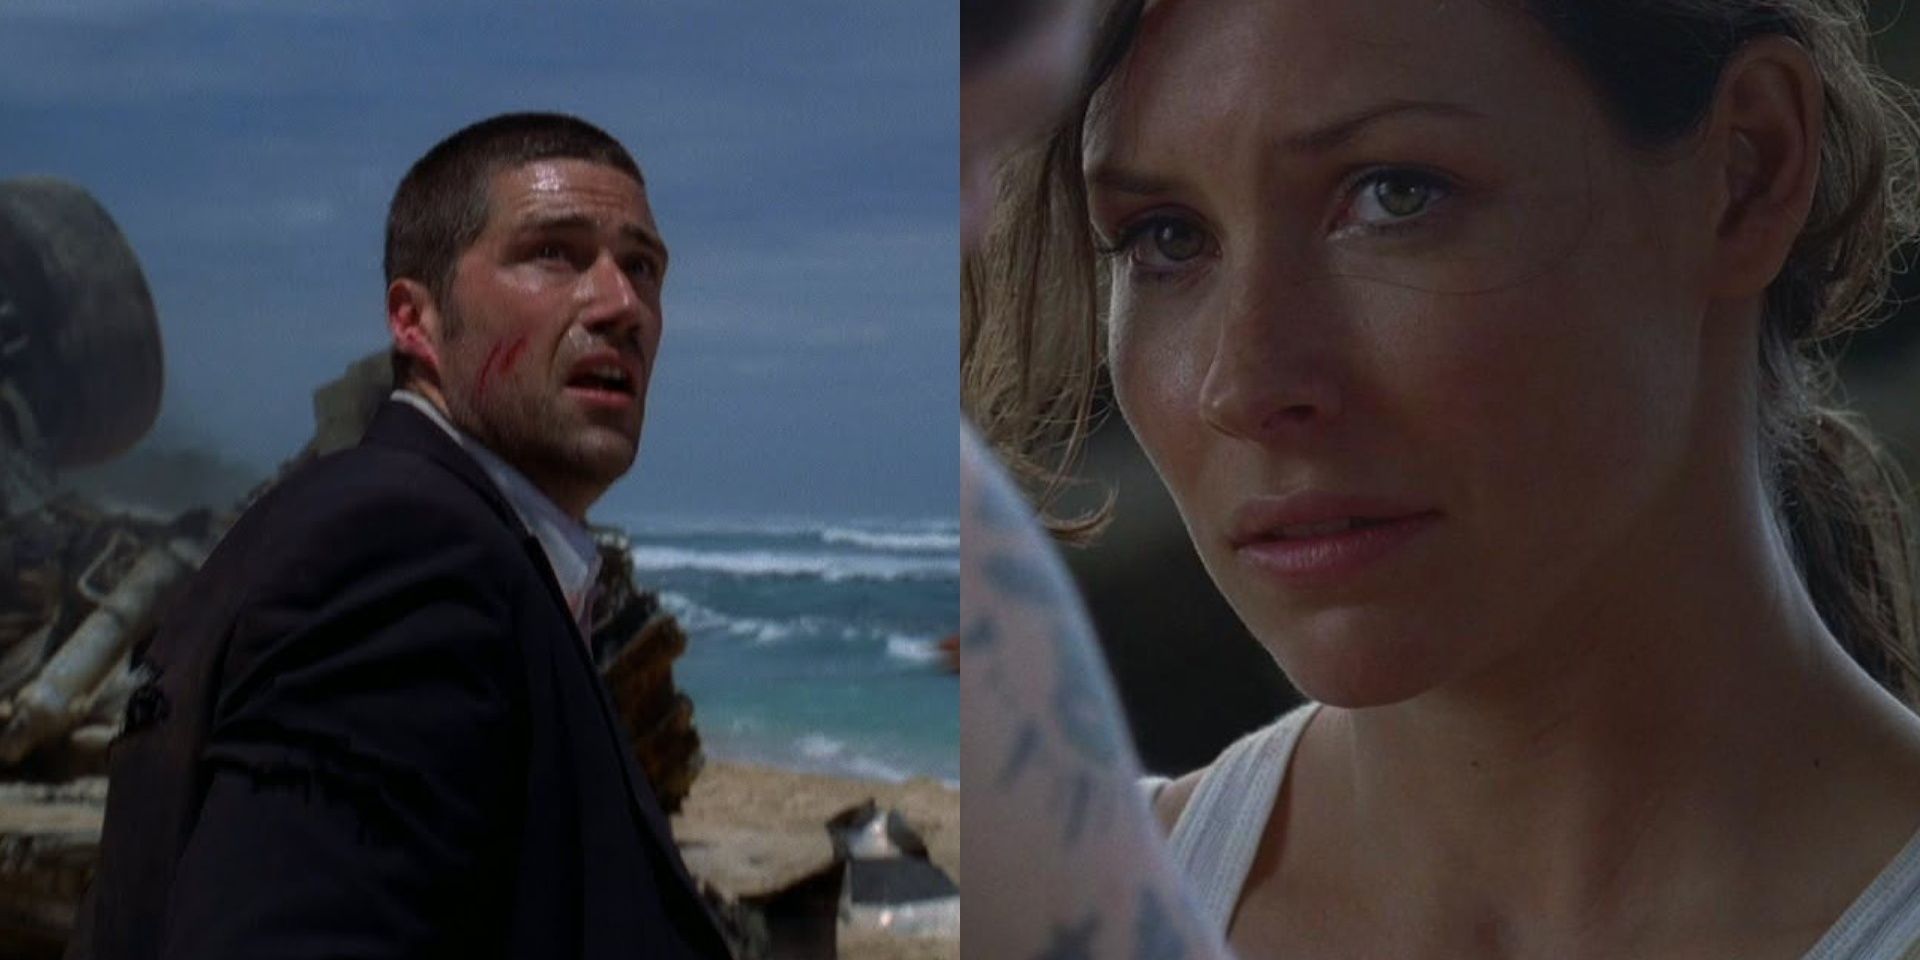 Two side by side images from the Lost pilot episode.